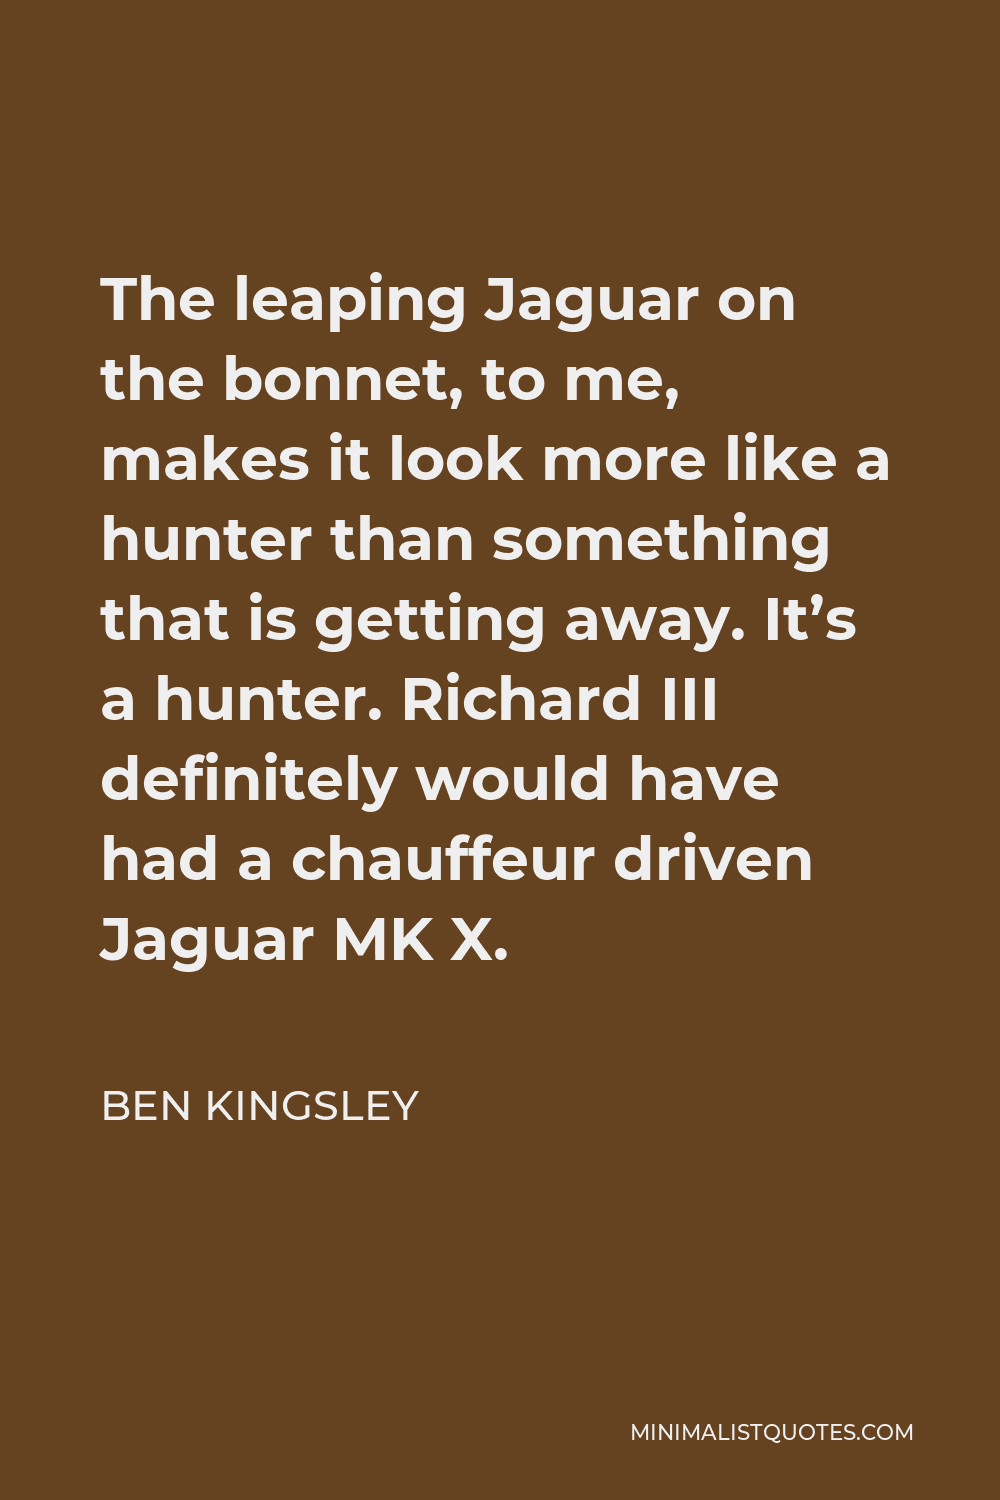 Ben Kingsley Quote - The leaping Jaguar on the bonnet, to me, makes it look more like a hunter than something that is getting away. It’s a hunter. Richard III definitely would have had a chauffeur driven Jaguar MK X.